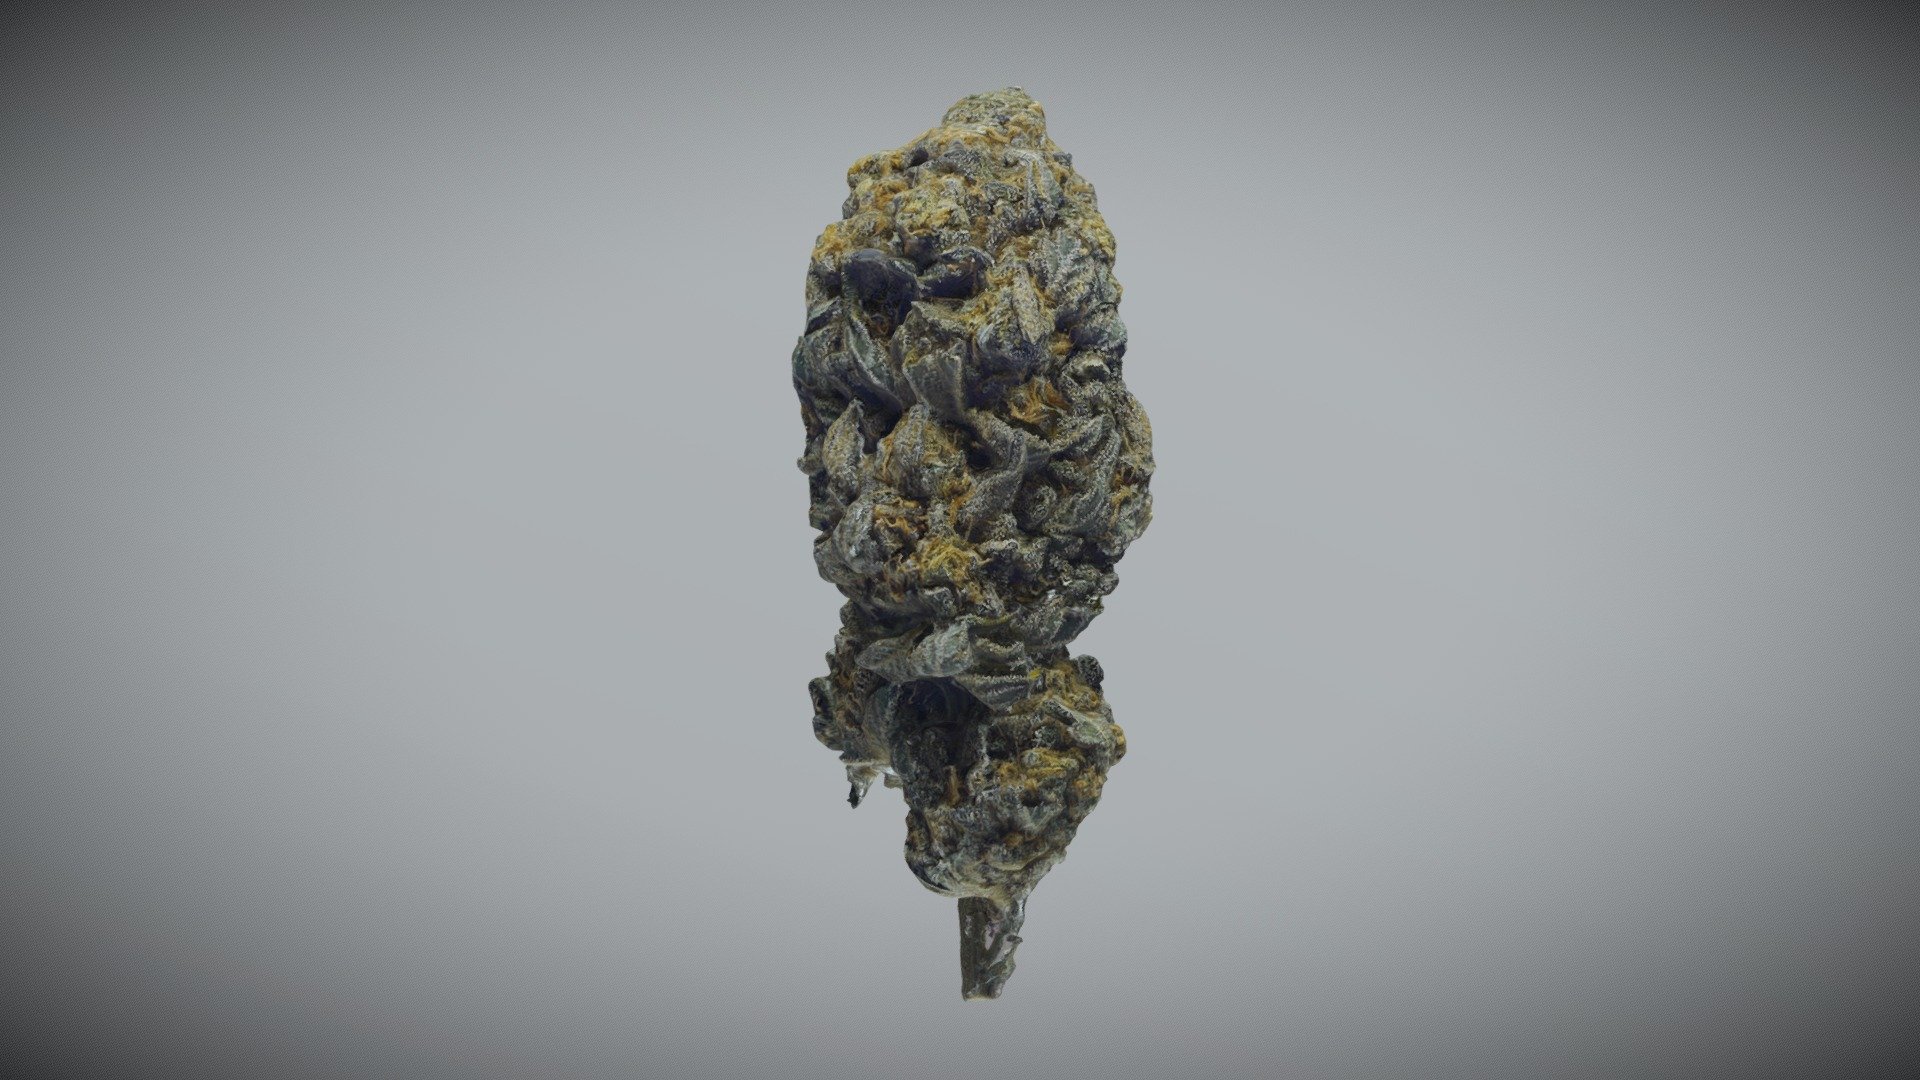 3D scan of a 5 gram bud (aka Justin Trudope).
Special thanks to Delta-9 Cannabis for the product: https://www.delta9.ca/ - 5 Gram Cannabis Bud - 3D model by PATIO Interactive (@thriveindrisption) 3d model